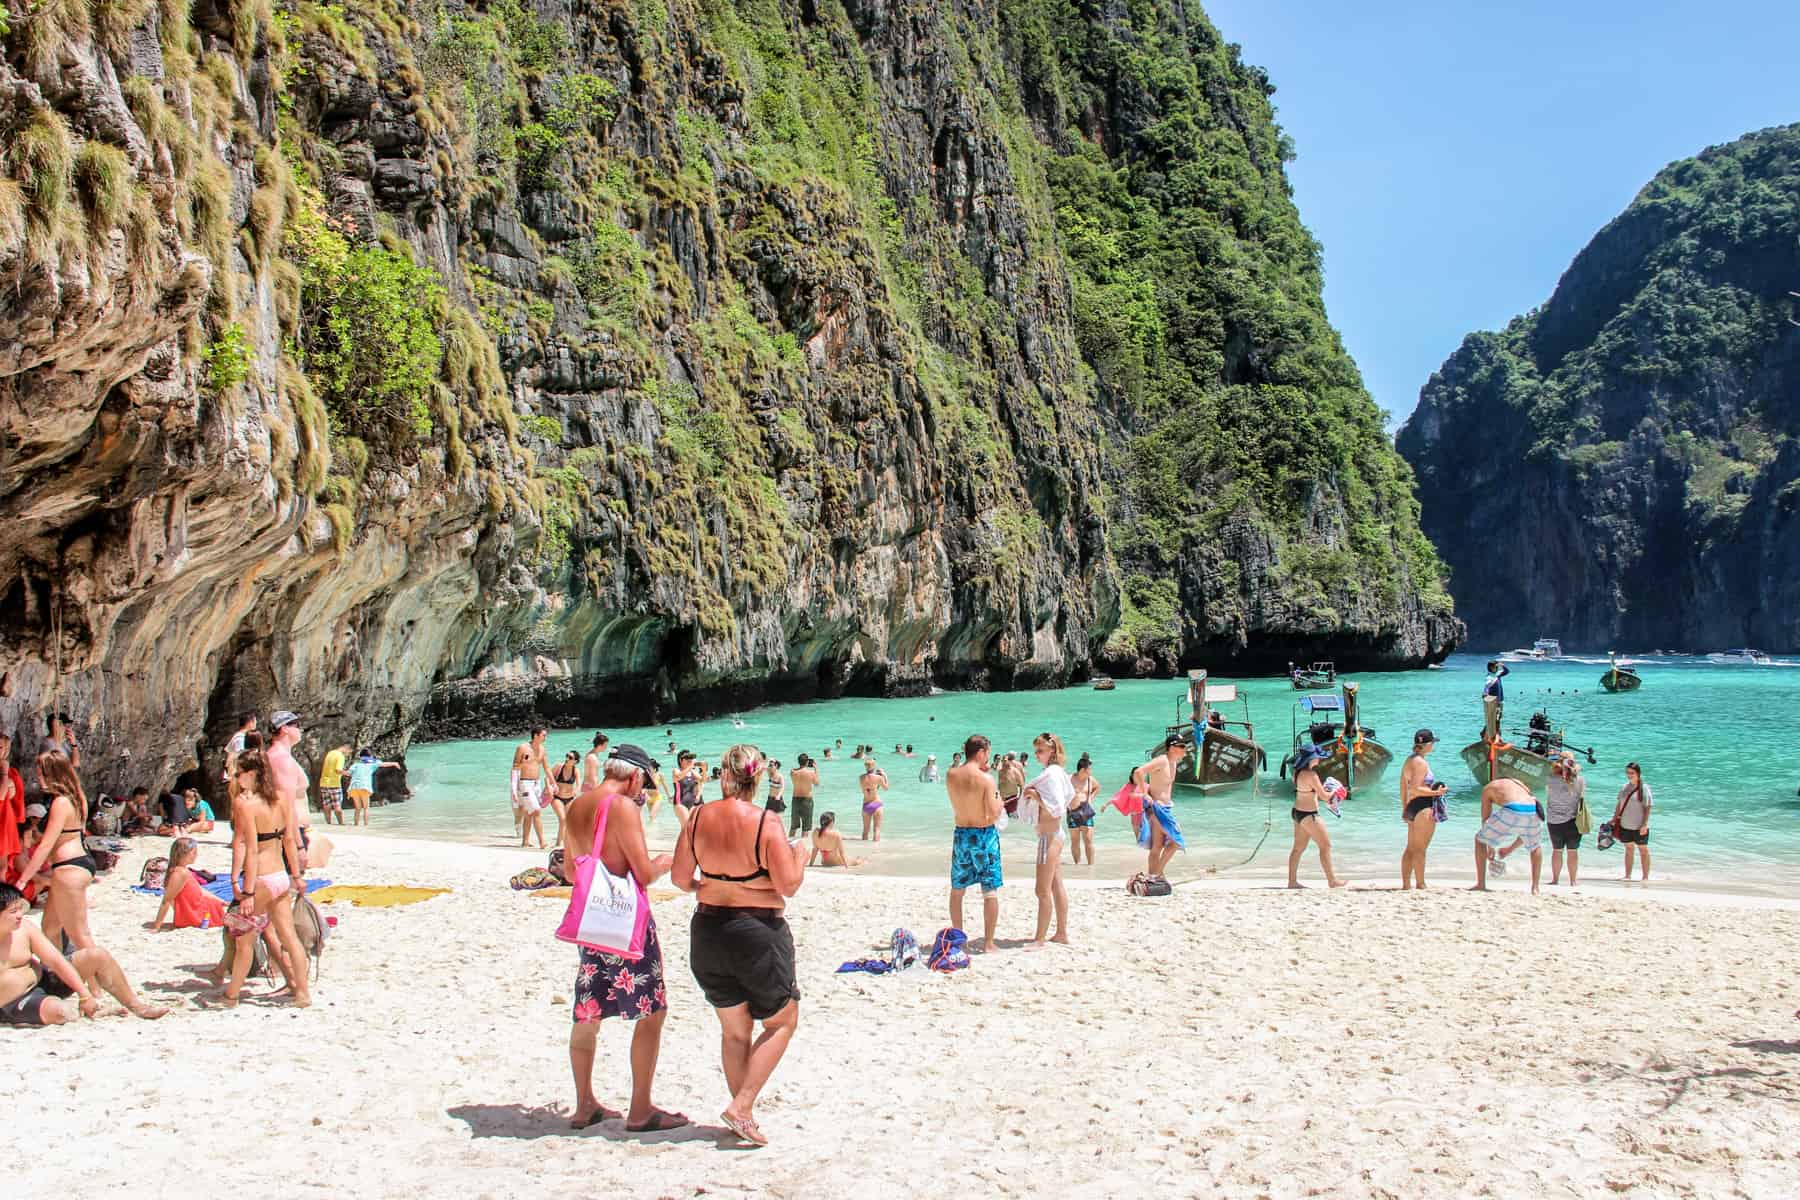 A small crowd on people on the beach and swimming in the waters of the rocky cove of Maya Bay in Thailand. 